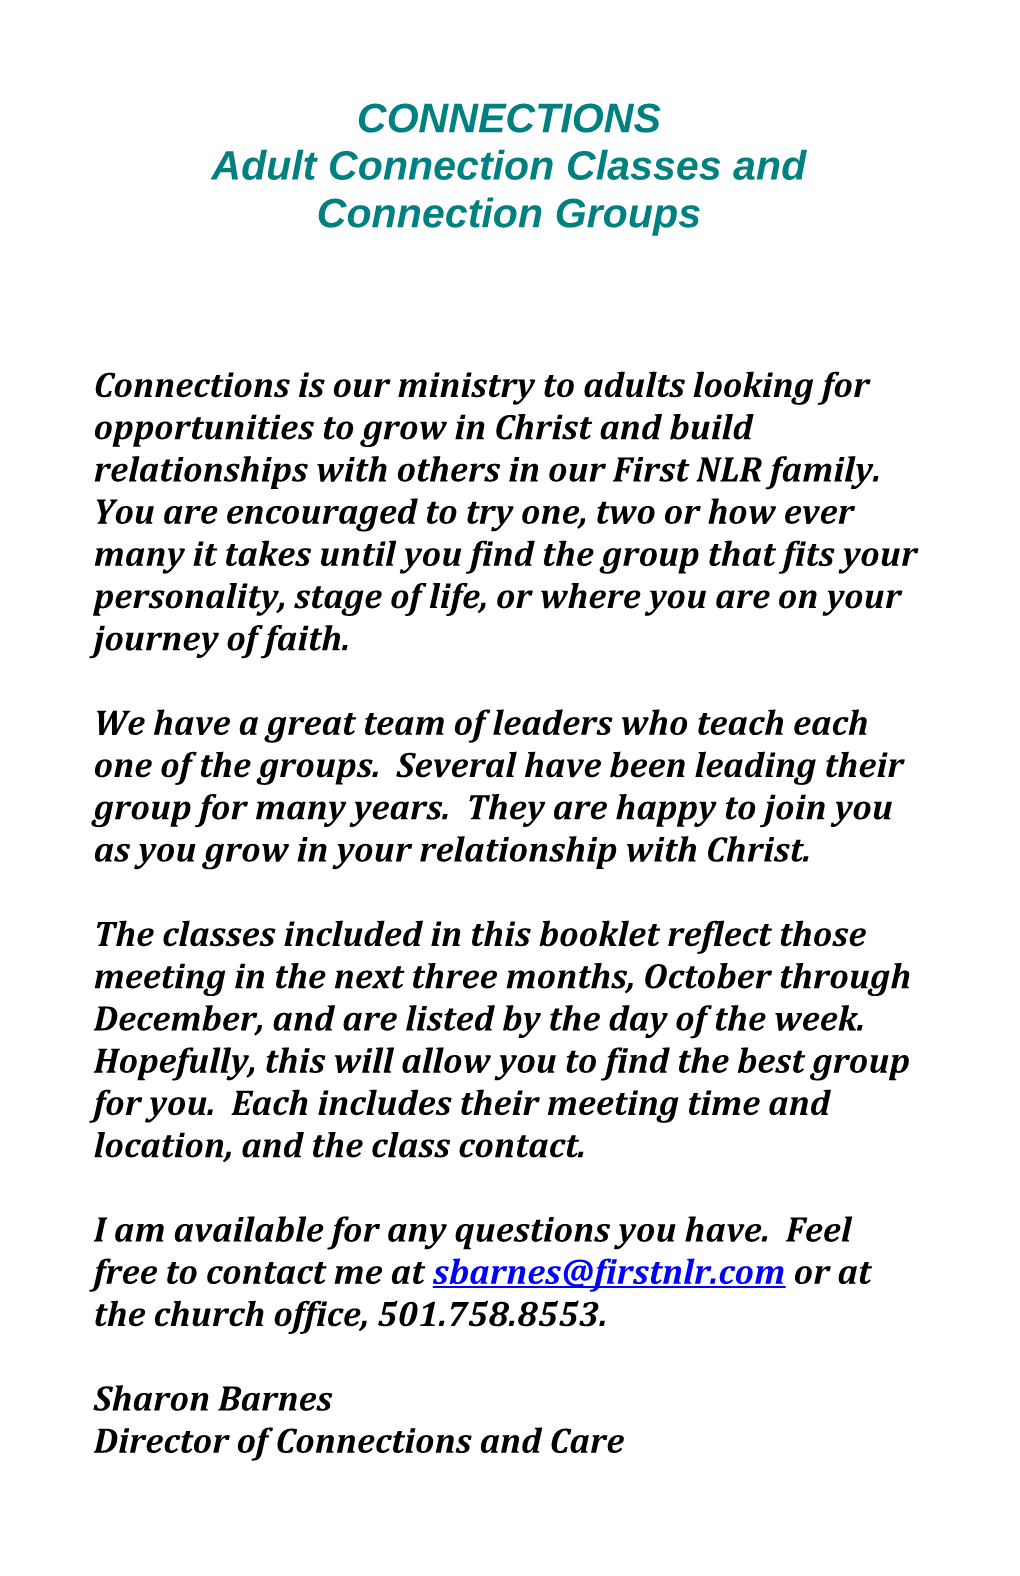 Adult Connection Classes and Connection Groups